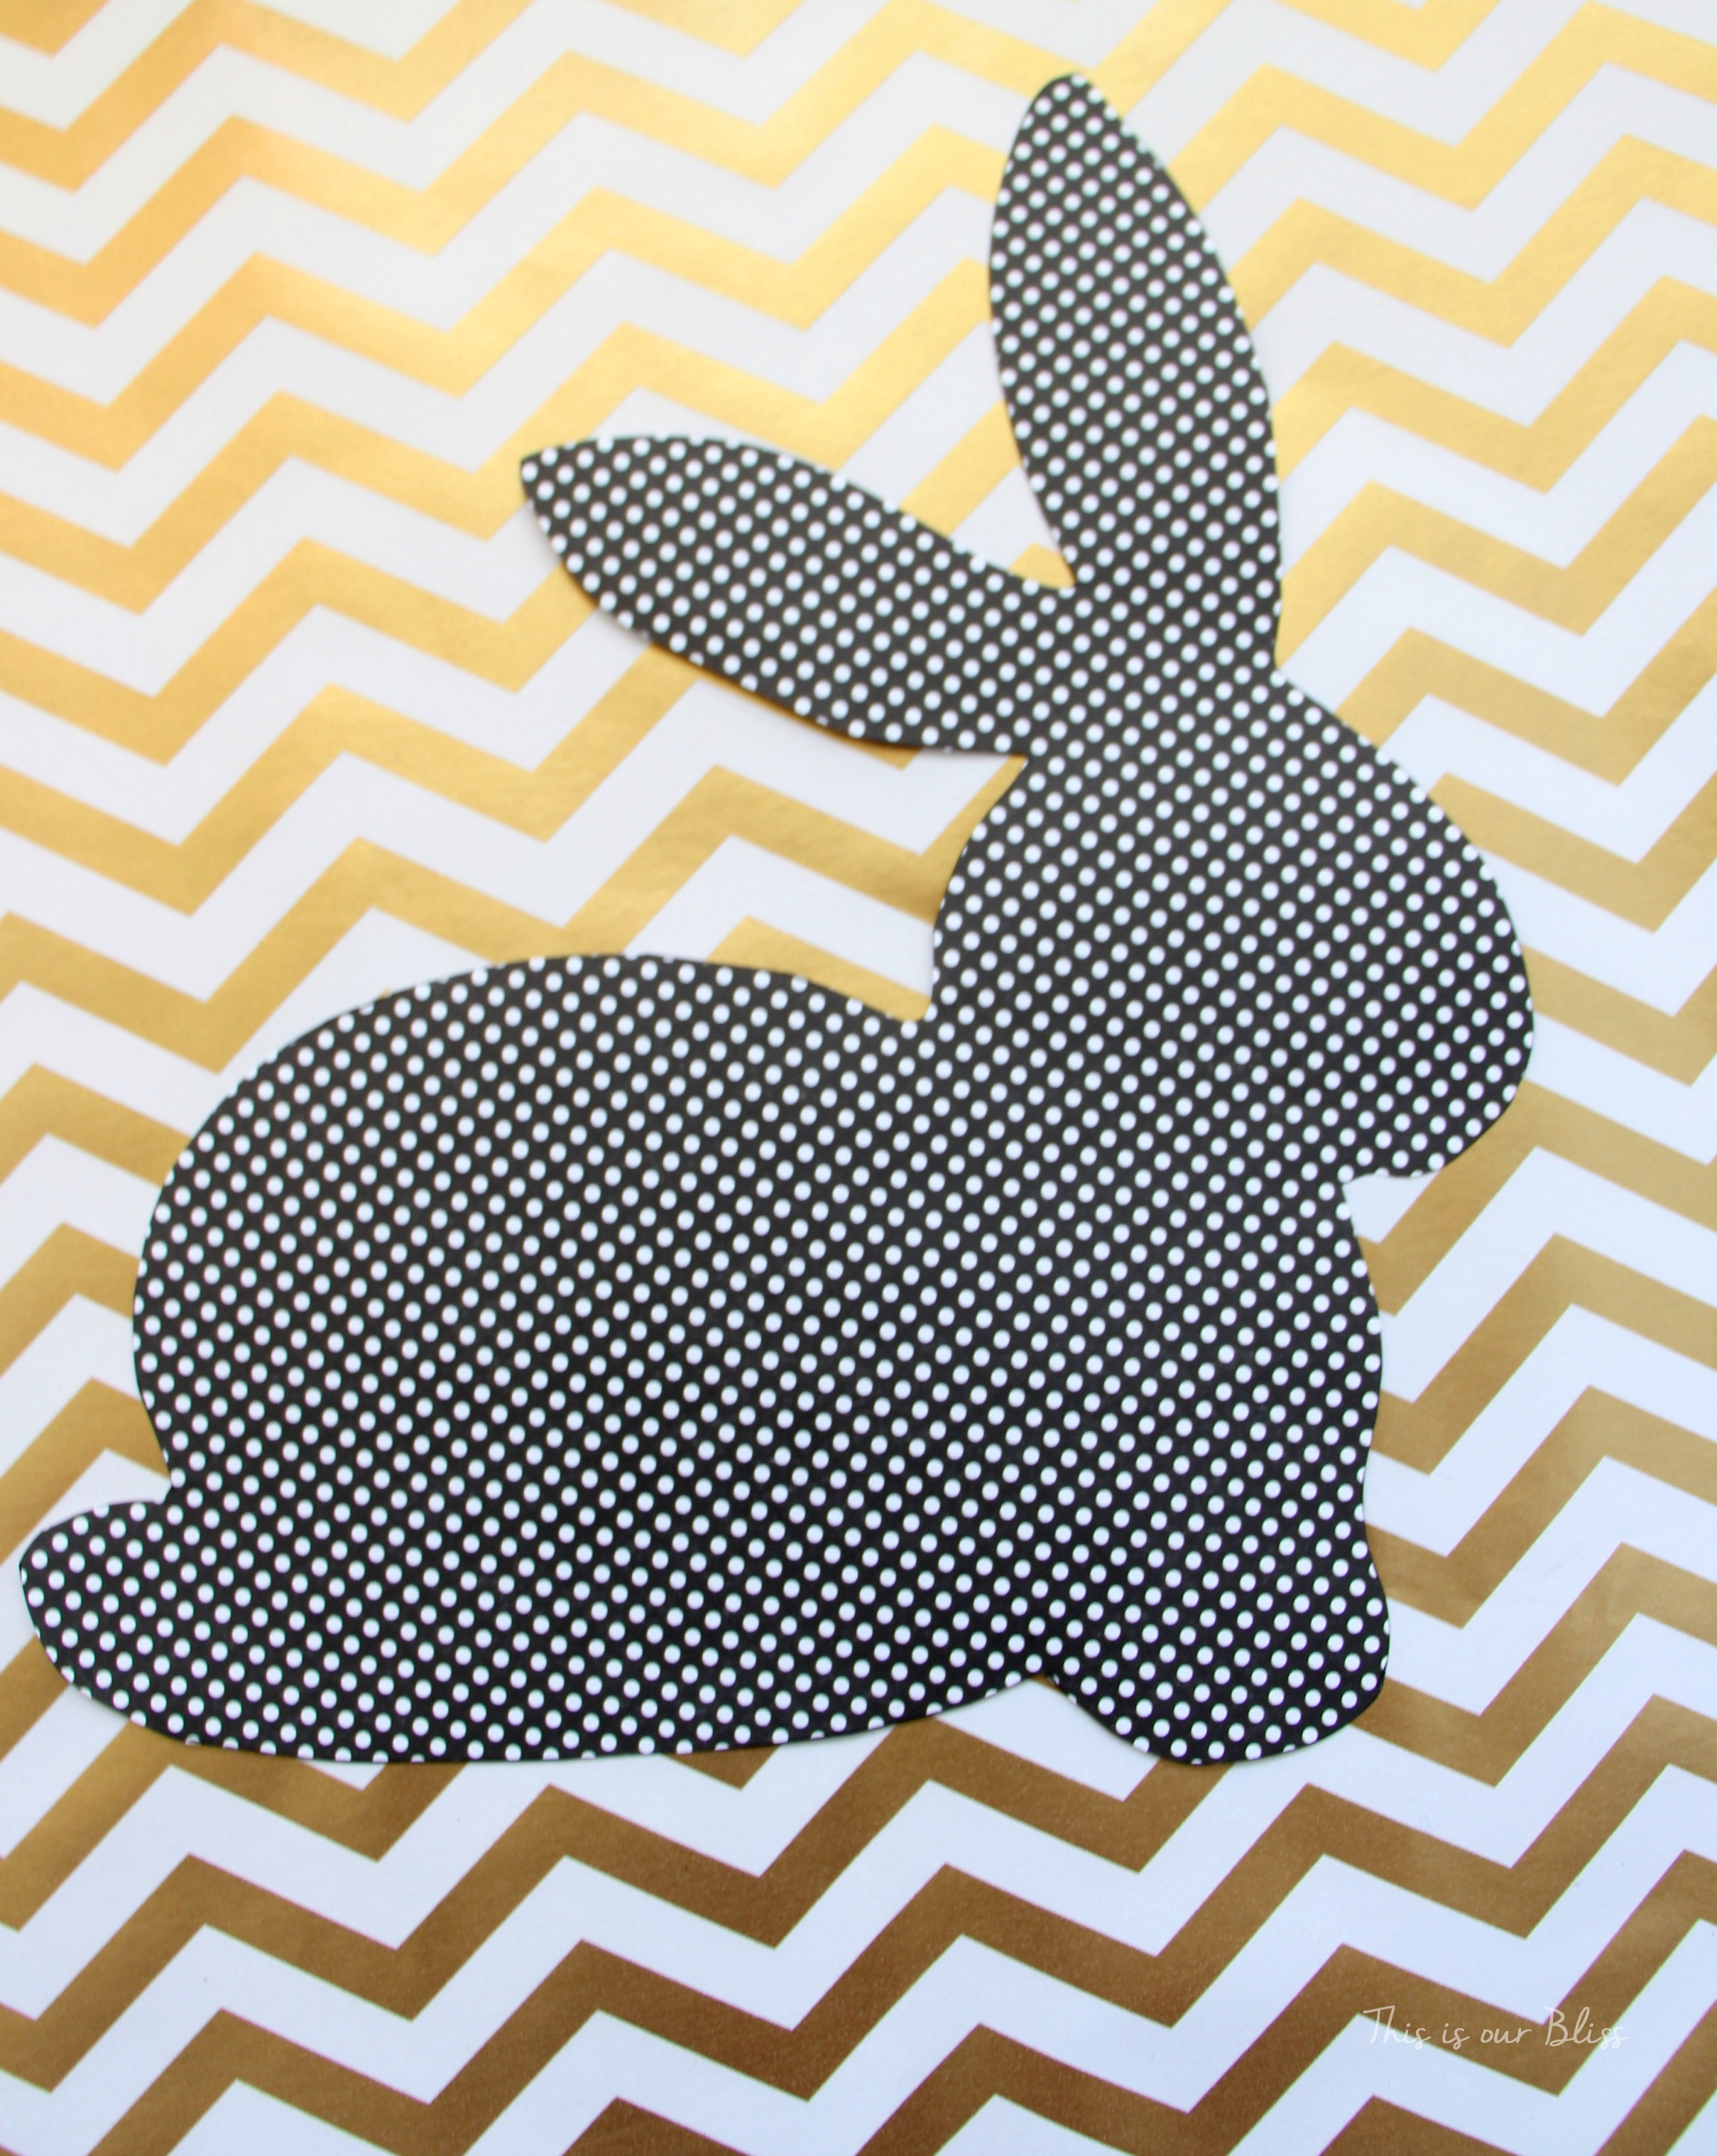 Bunny printable - trace onto paper - cut out to use as a stencil - Chic Easter art - black white and gold - This is our Bliss 2